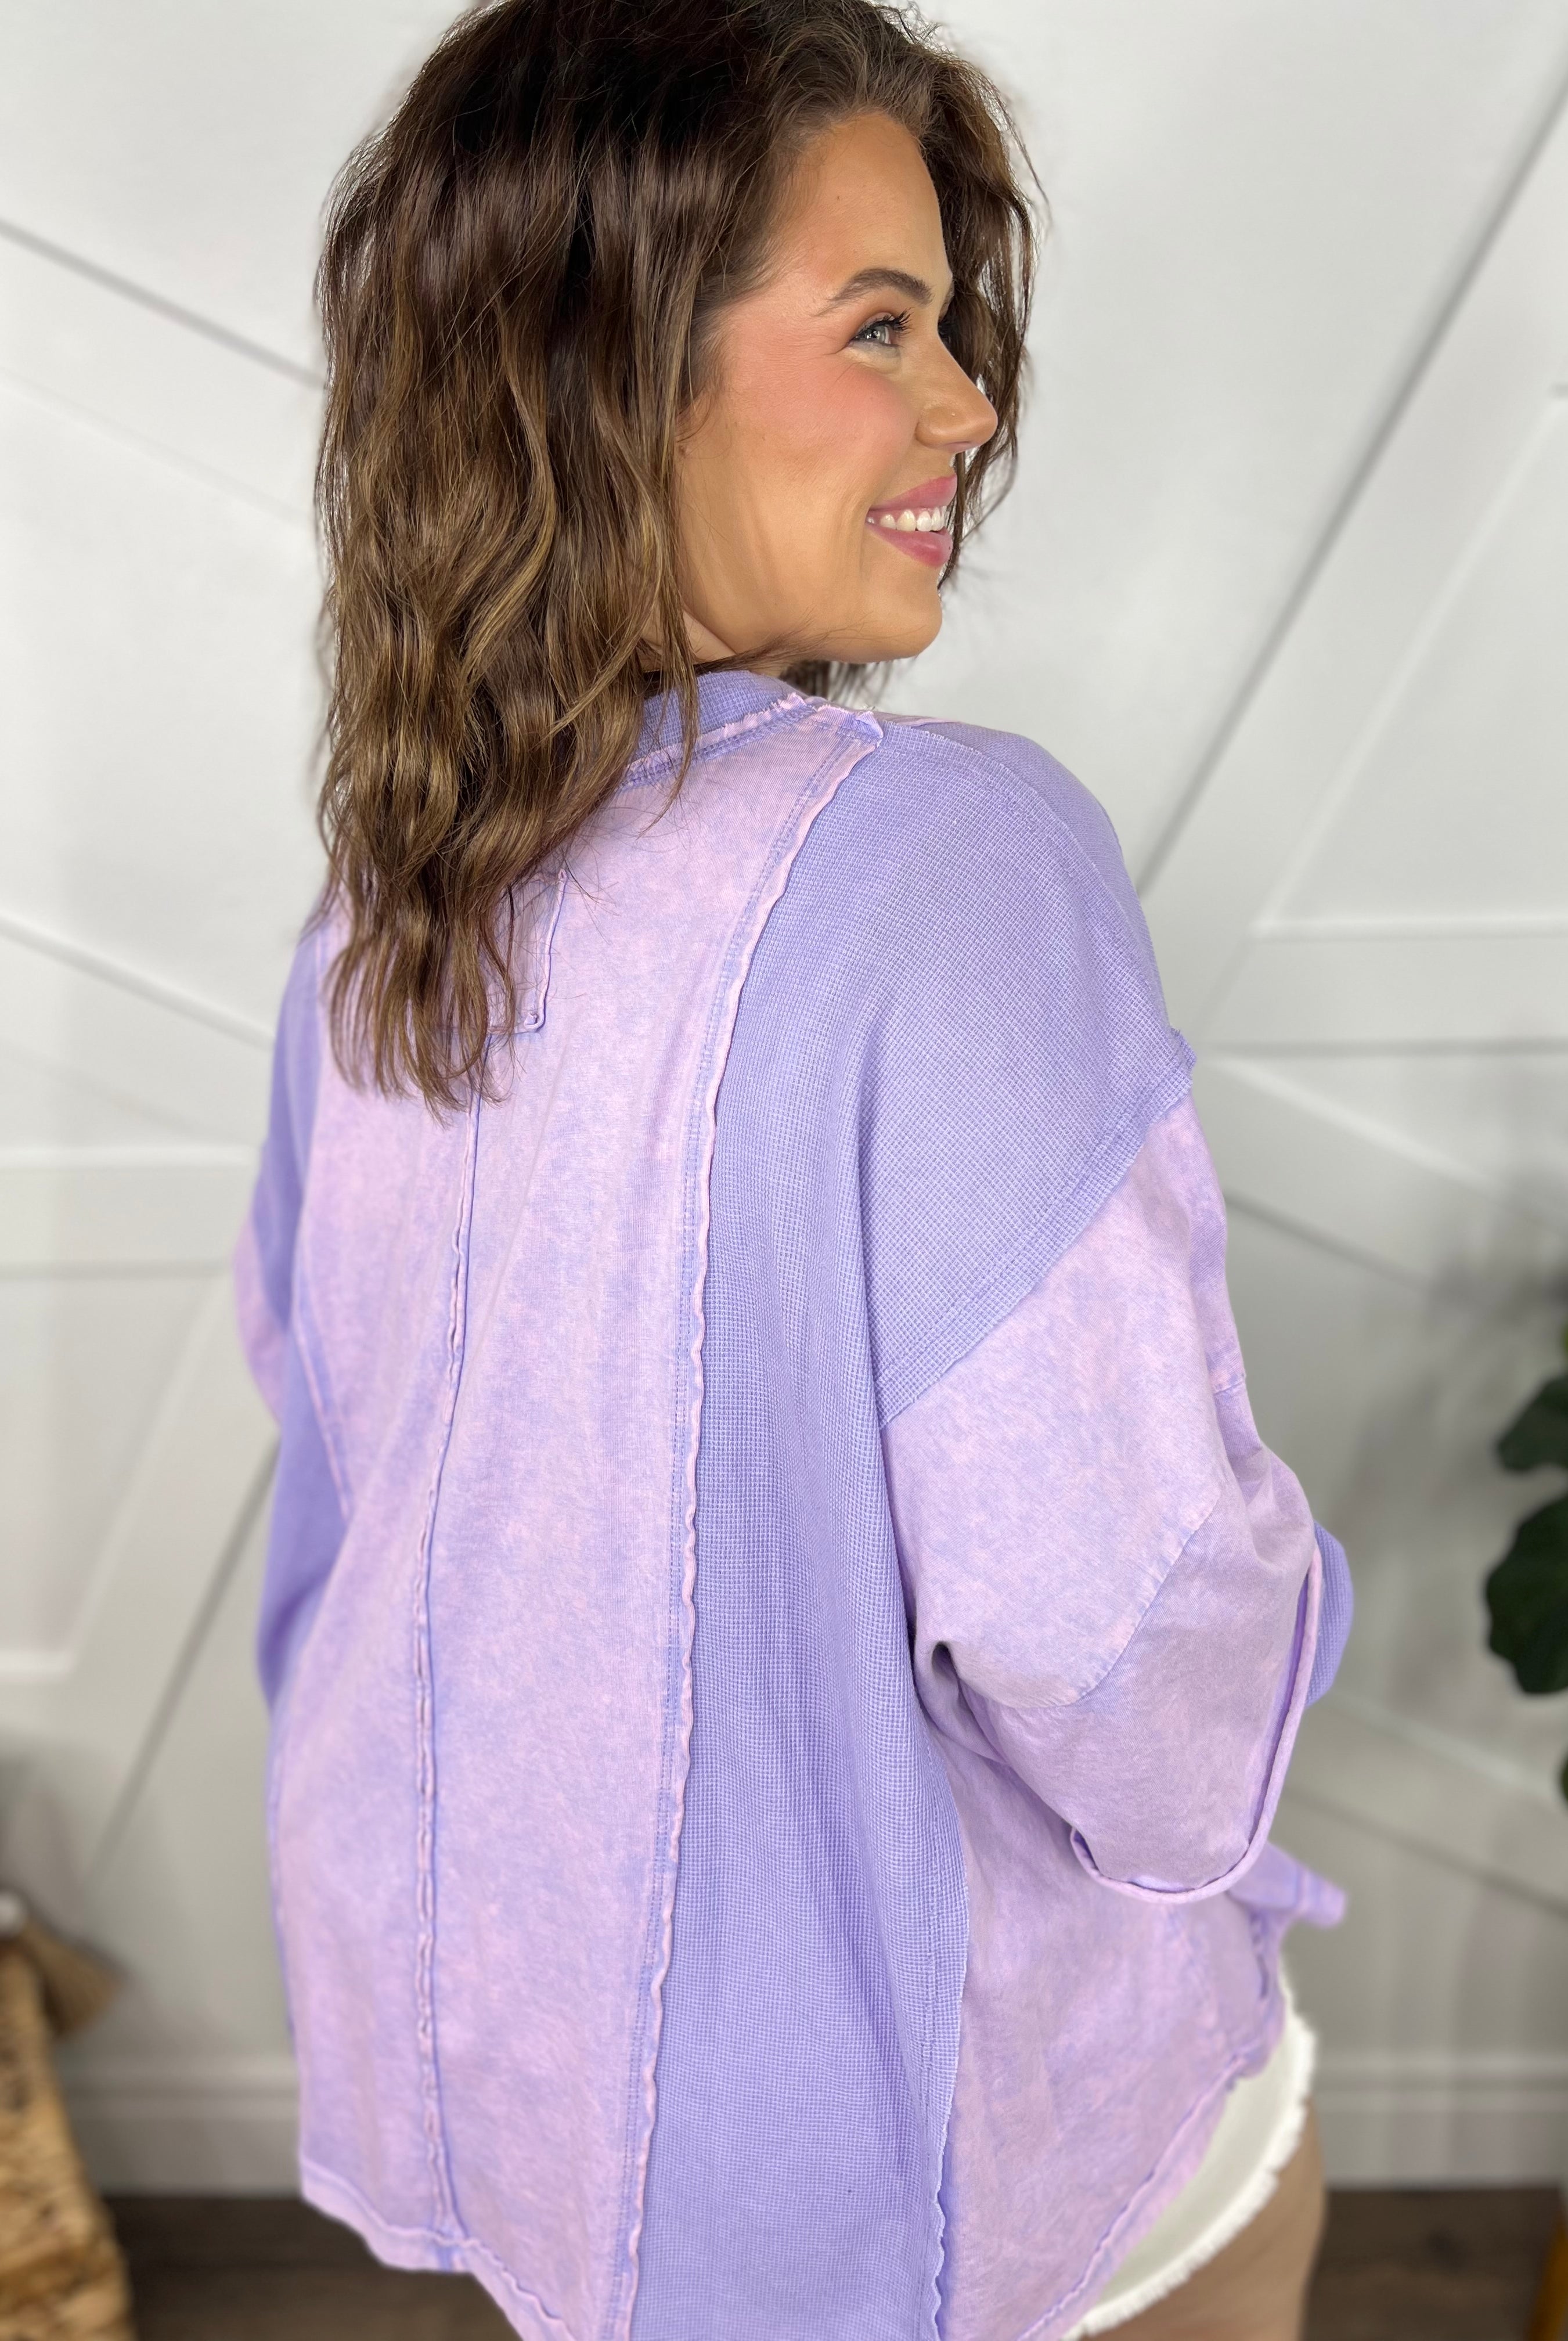 Winner Long Sleeve Top-120 Long Sleeve Tops-Oli & Hali-Heathered Boho Boutique, Women's Fashion and Accessories in Palmetto, FL